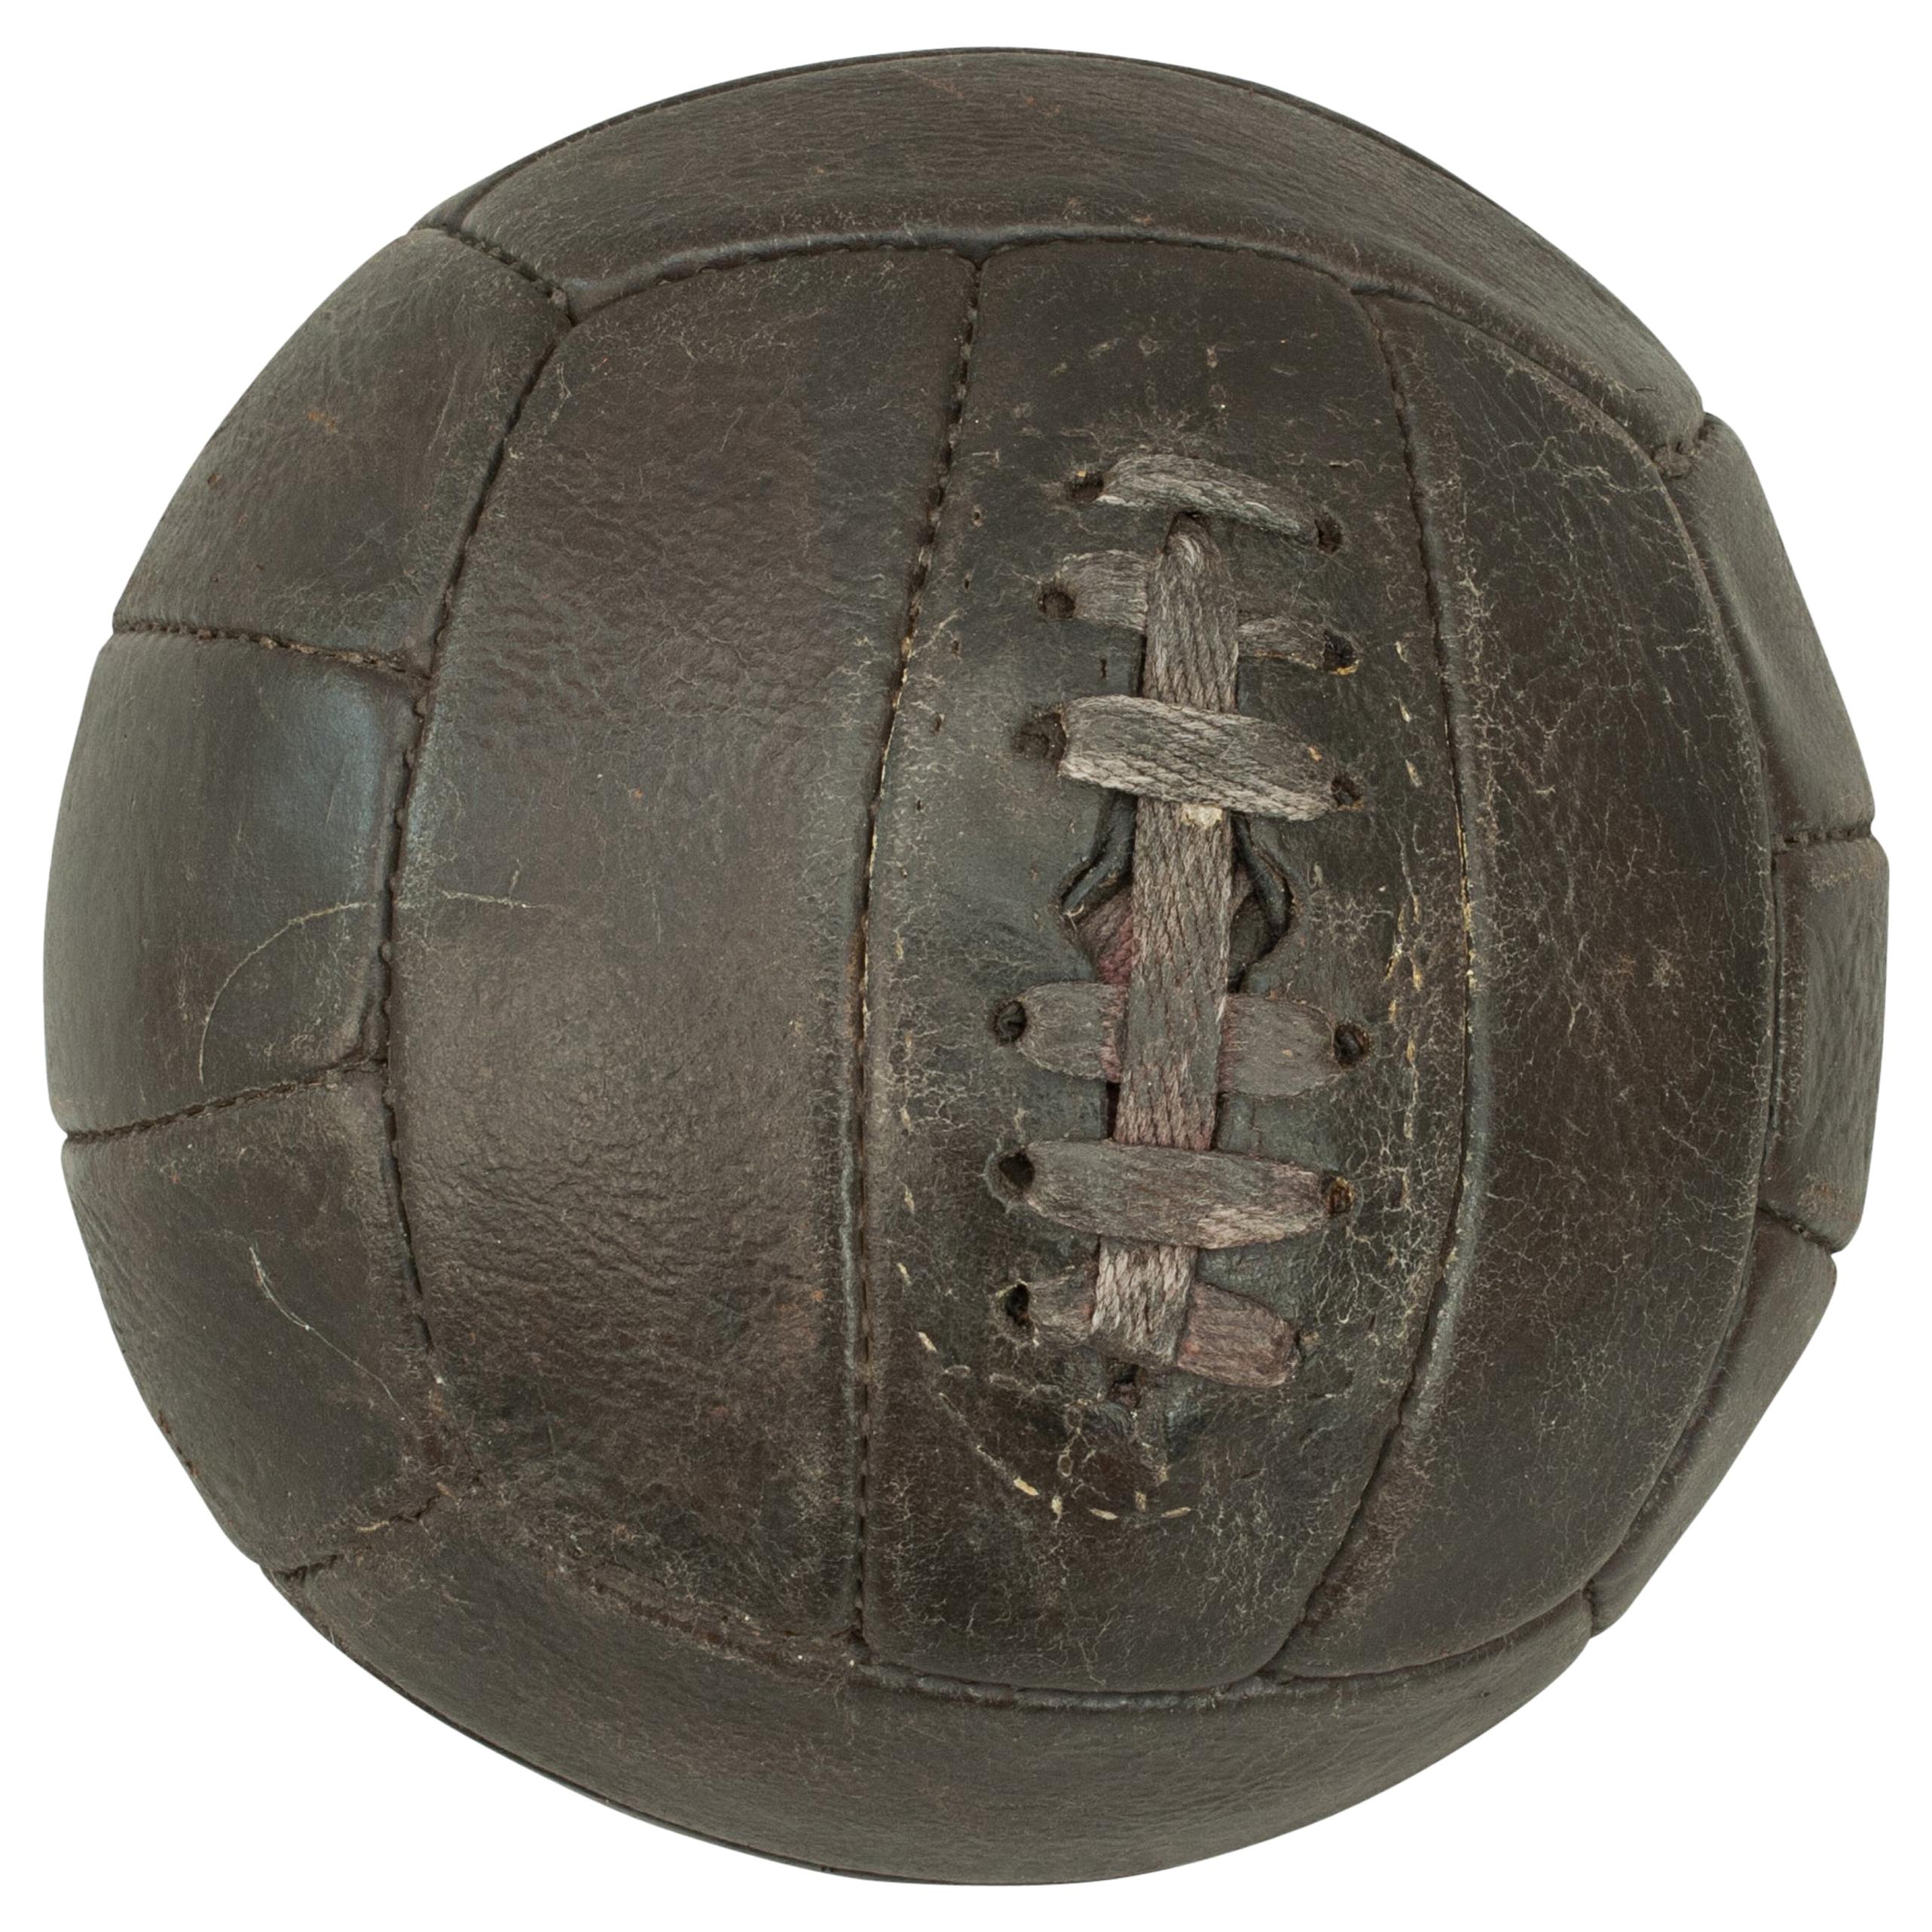 Vintage Football, Dark Brown Leather 18 Panel Lace Up Soccer Ball